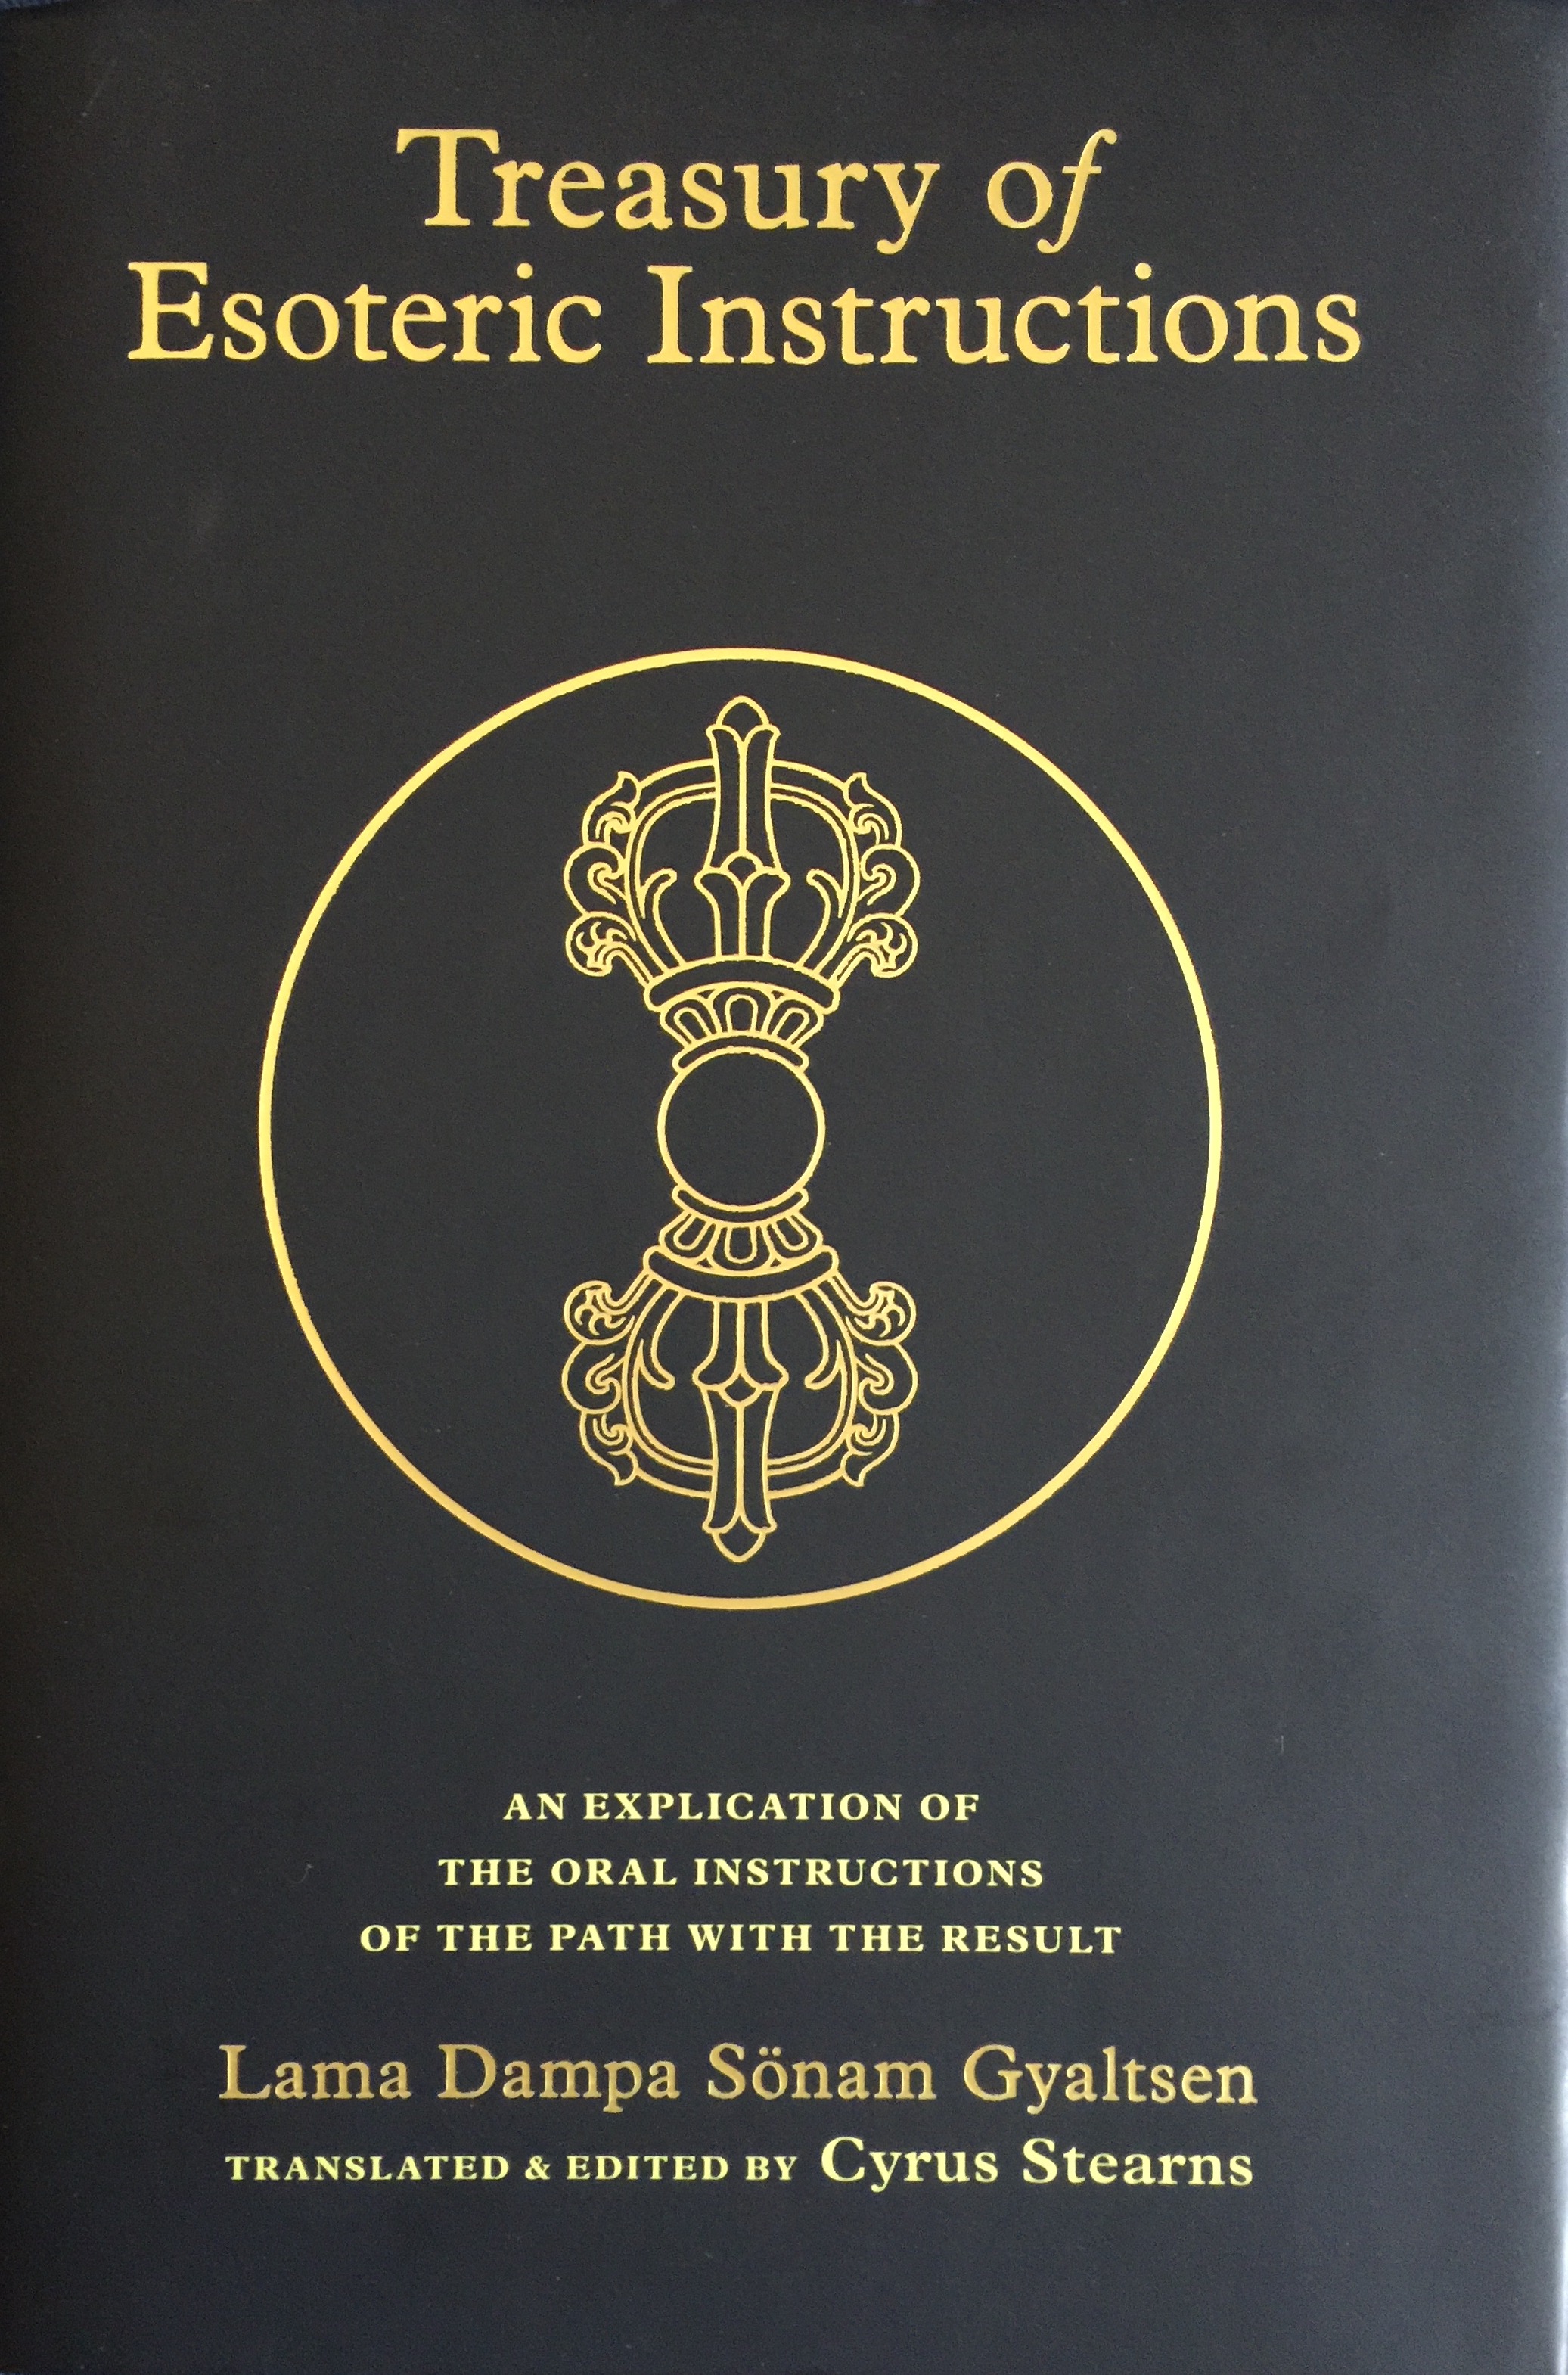 Treasury of Esoteric Instructions-front.jpg